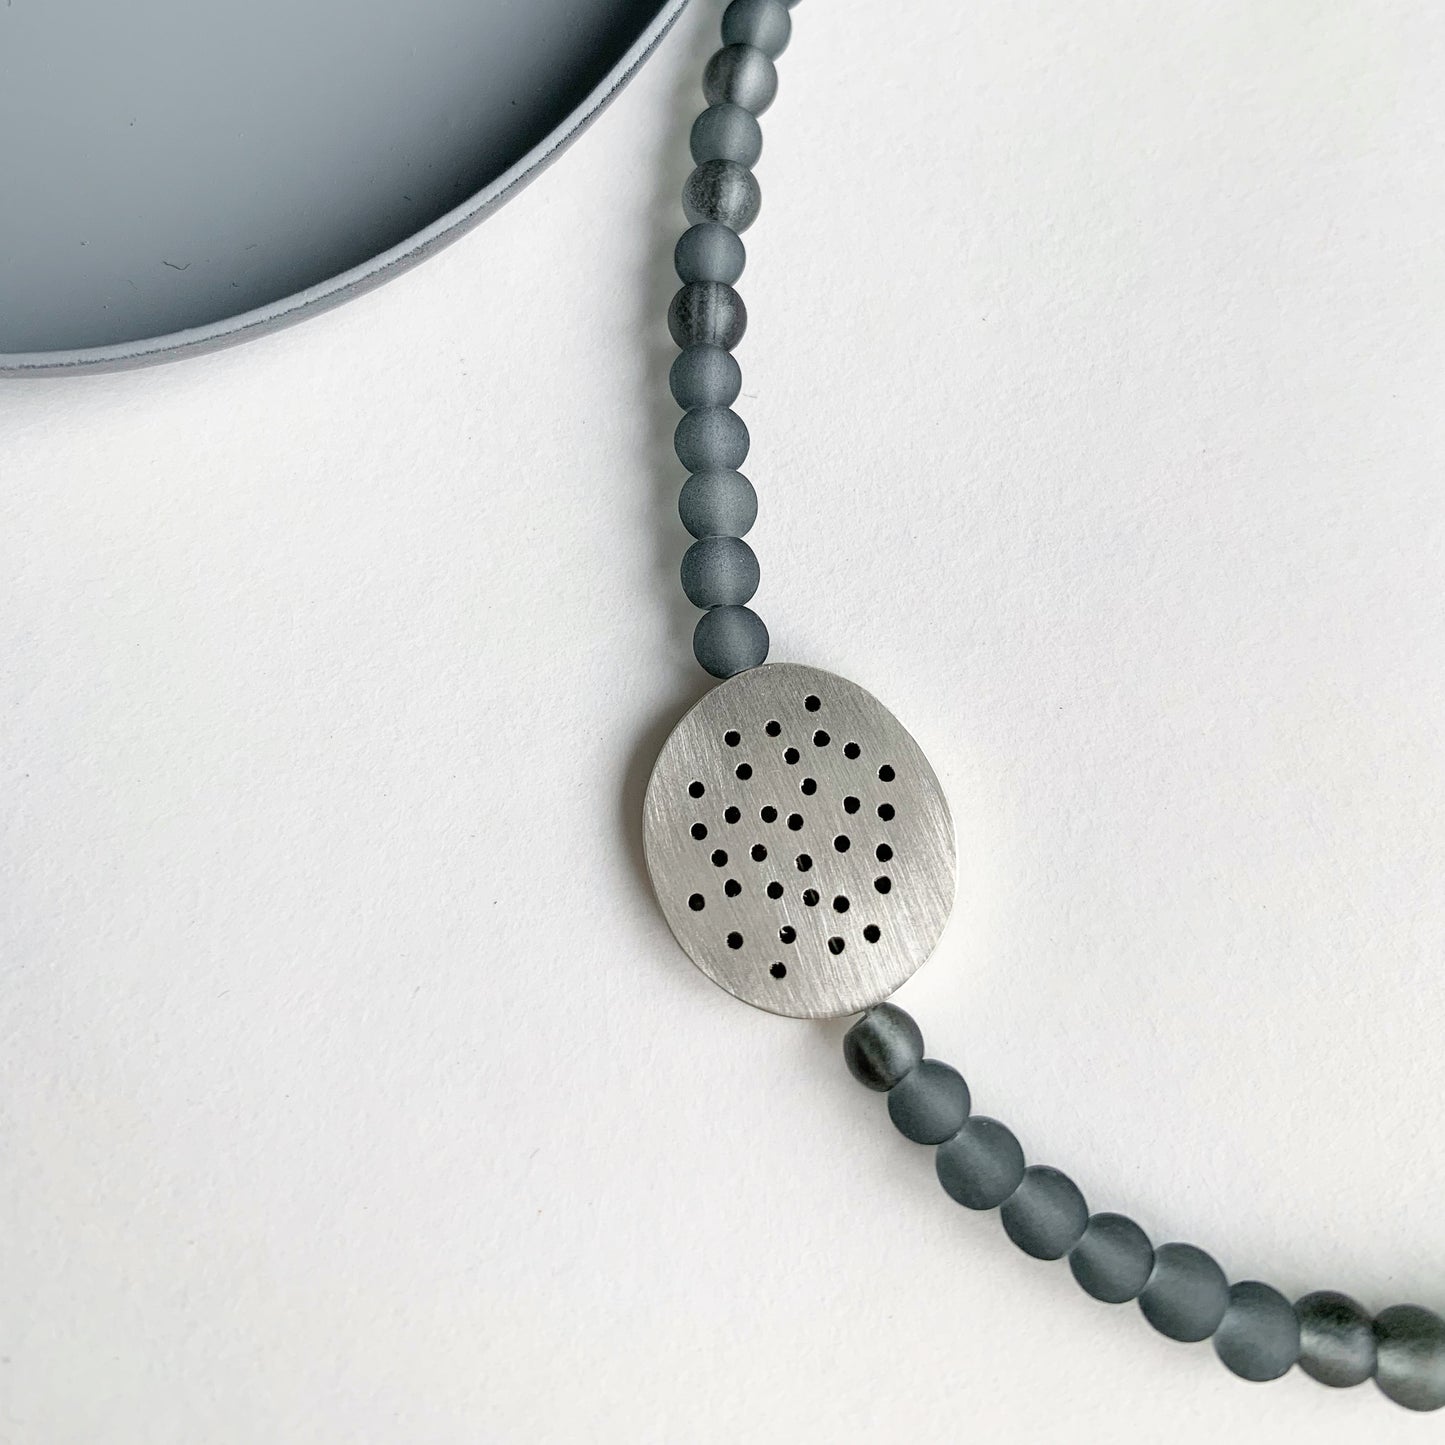 Grey Bead and Silver Pebble Necklace